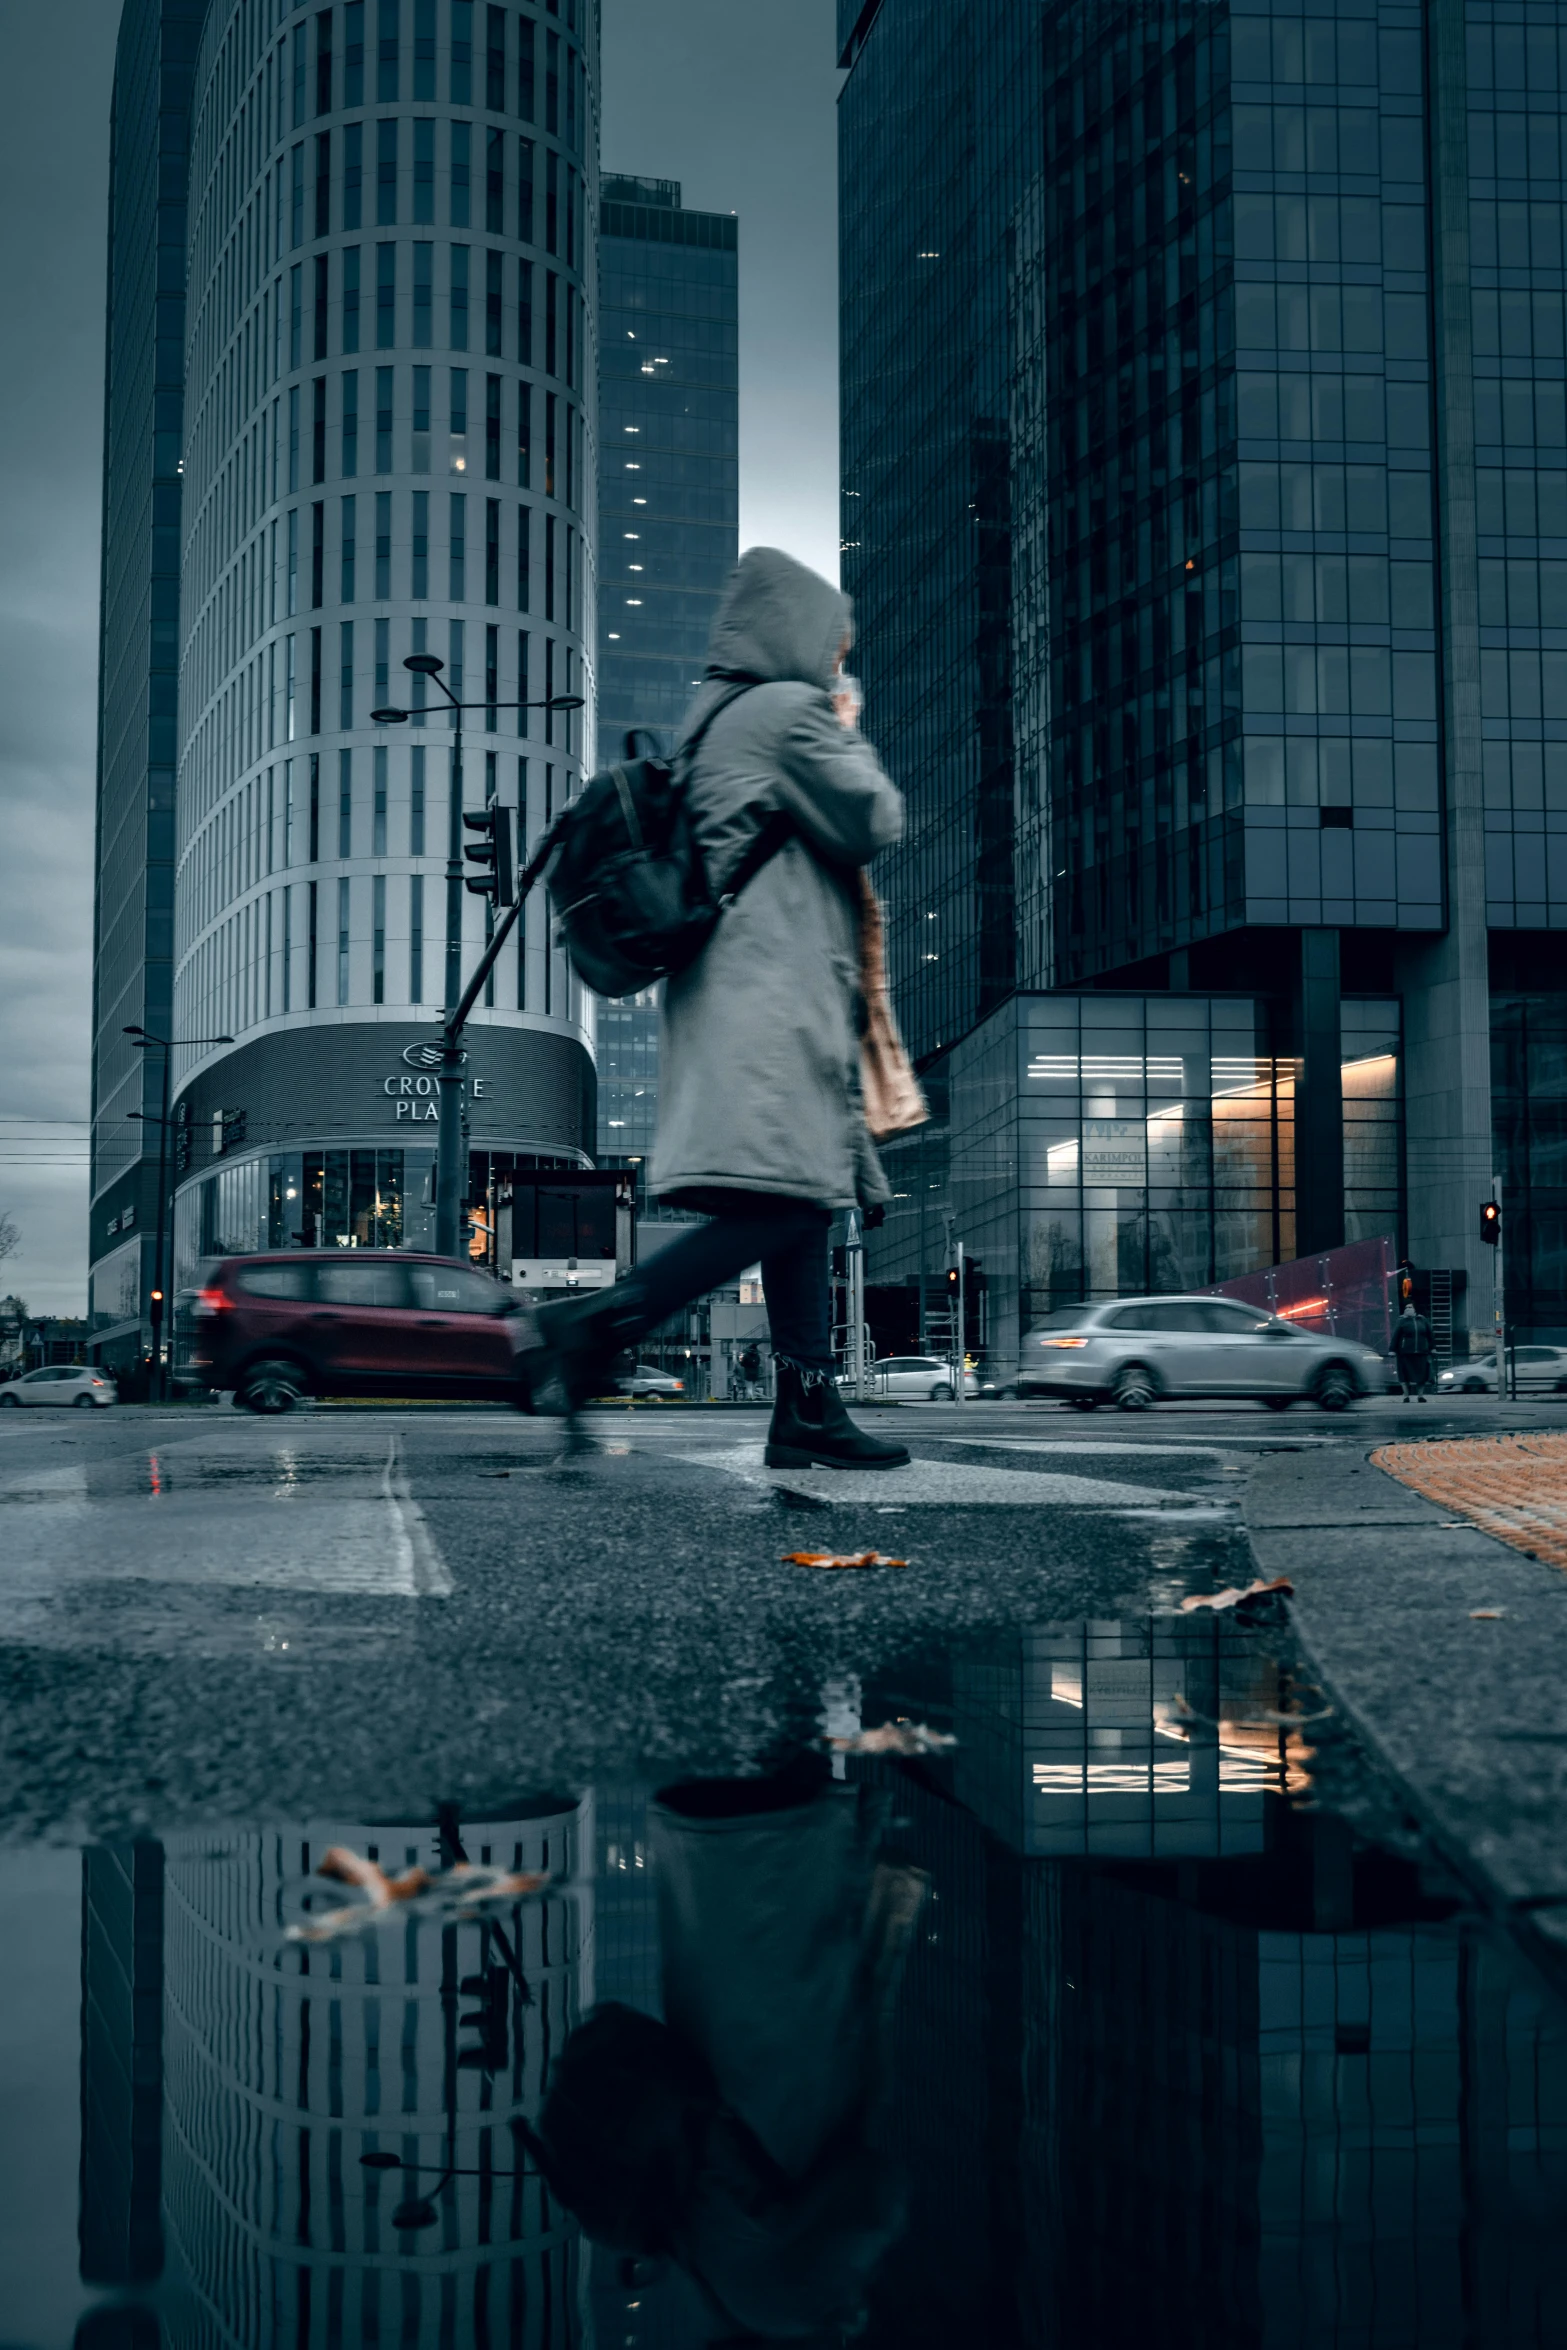 a person walking across a city street in the rain, by Tobias Stimmer, ultrawide cinematic, wet reflective ground, high rises, city morning